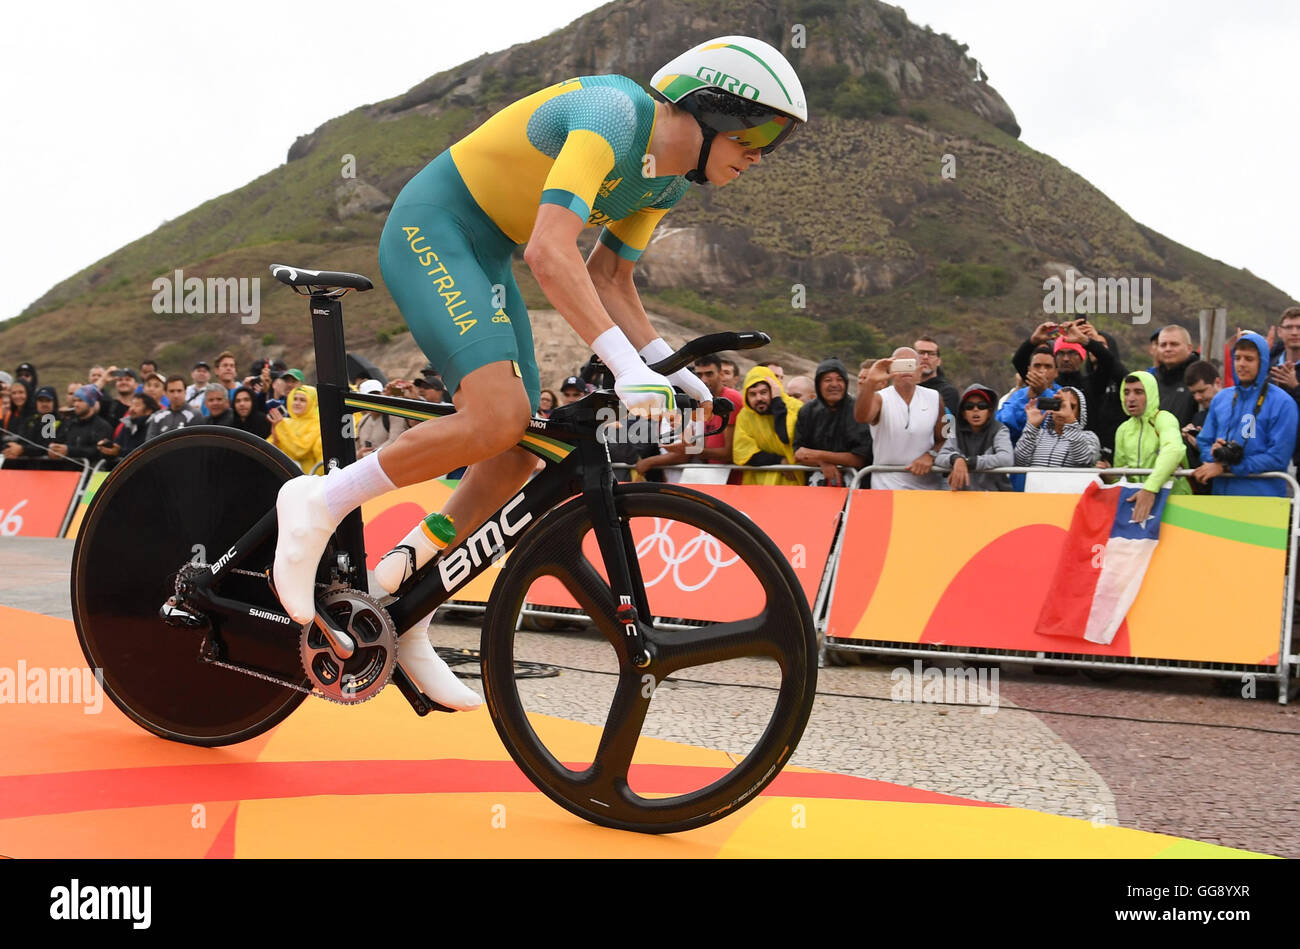 Rio de Janeiro, Brazil. 10th Aug, 2016. Dennis Rohan of Australia at the start of the men's Individual Time Trial of the Rio 2016 Olympic Games Road Cycling events at Pontal in Rio de Janeiro, Brazil, 10 August 2016. Photo: Sebastian Kahnert/dpa/Alamy Live News Stock Photo